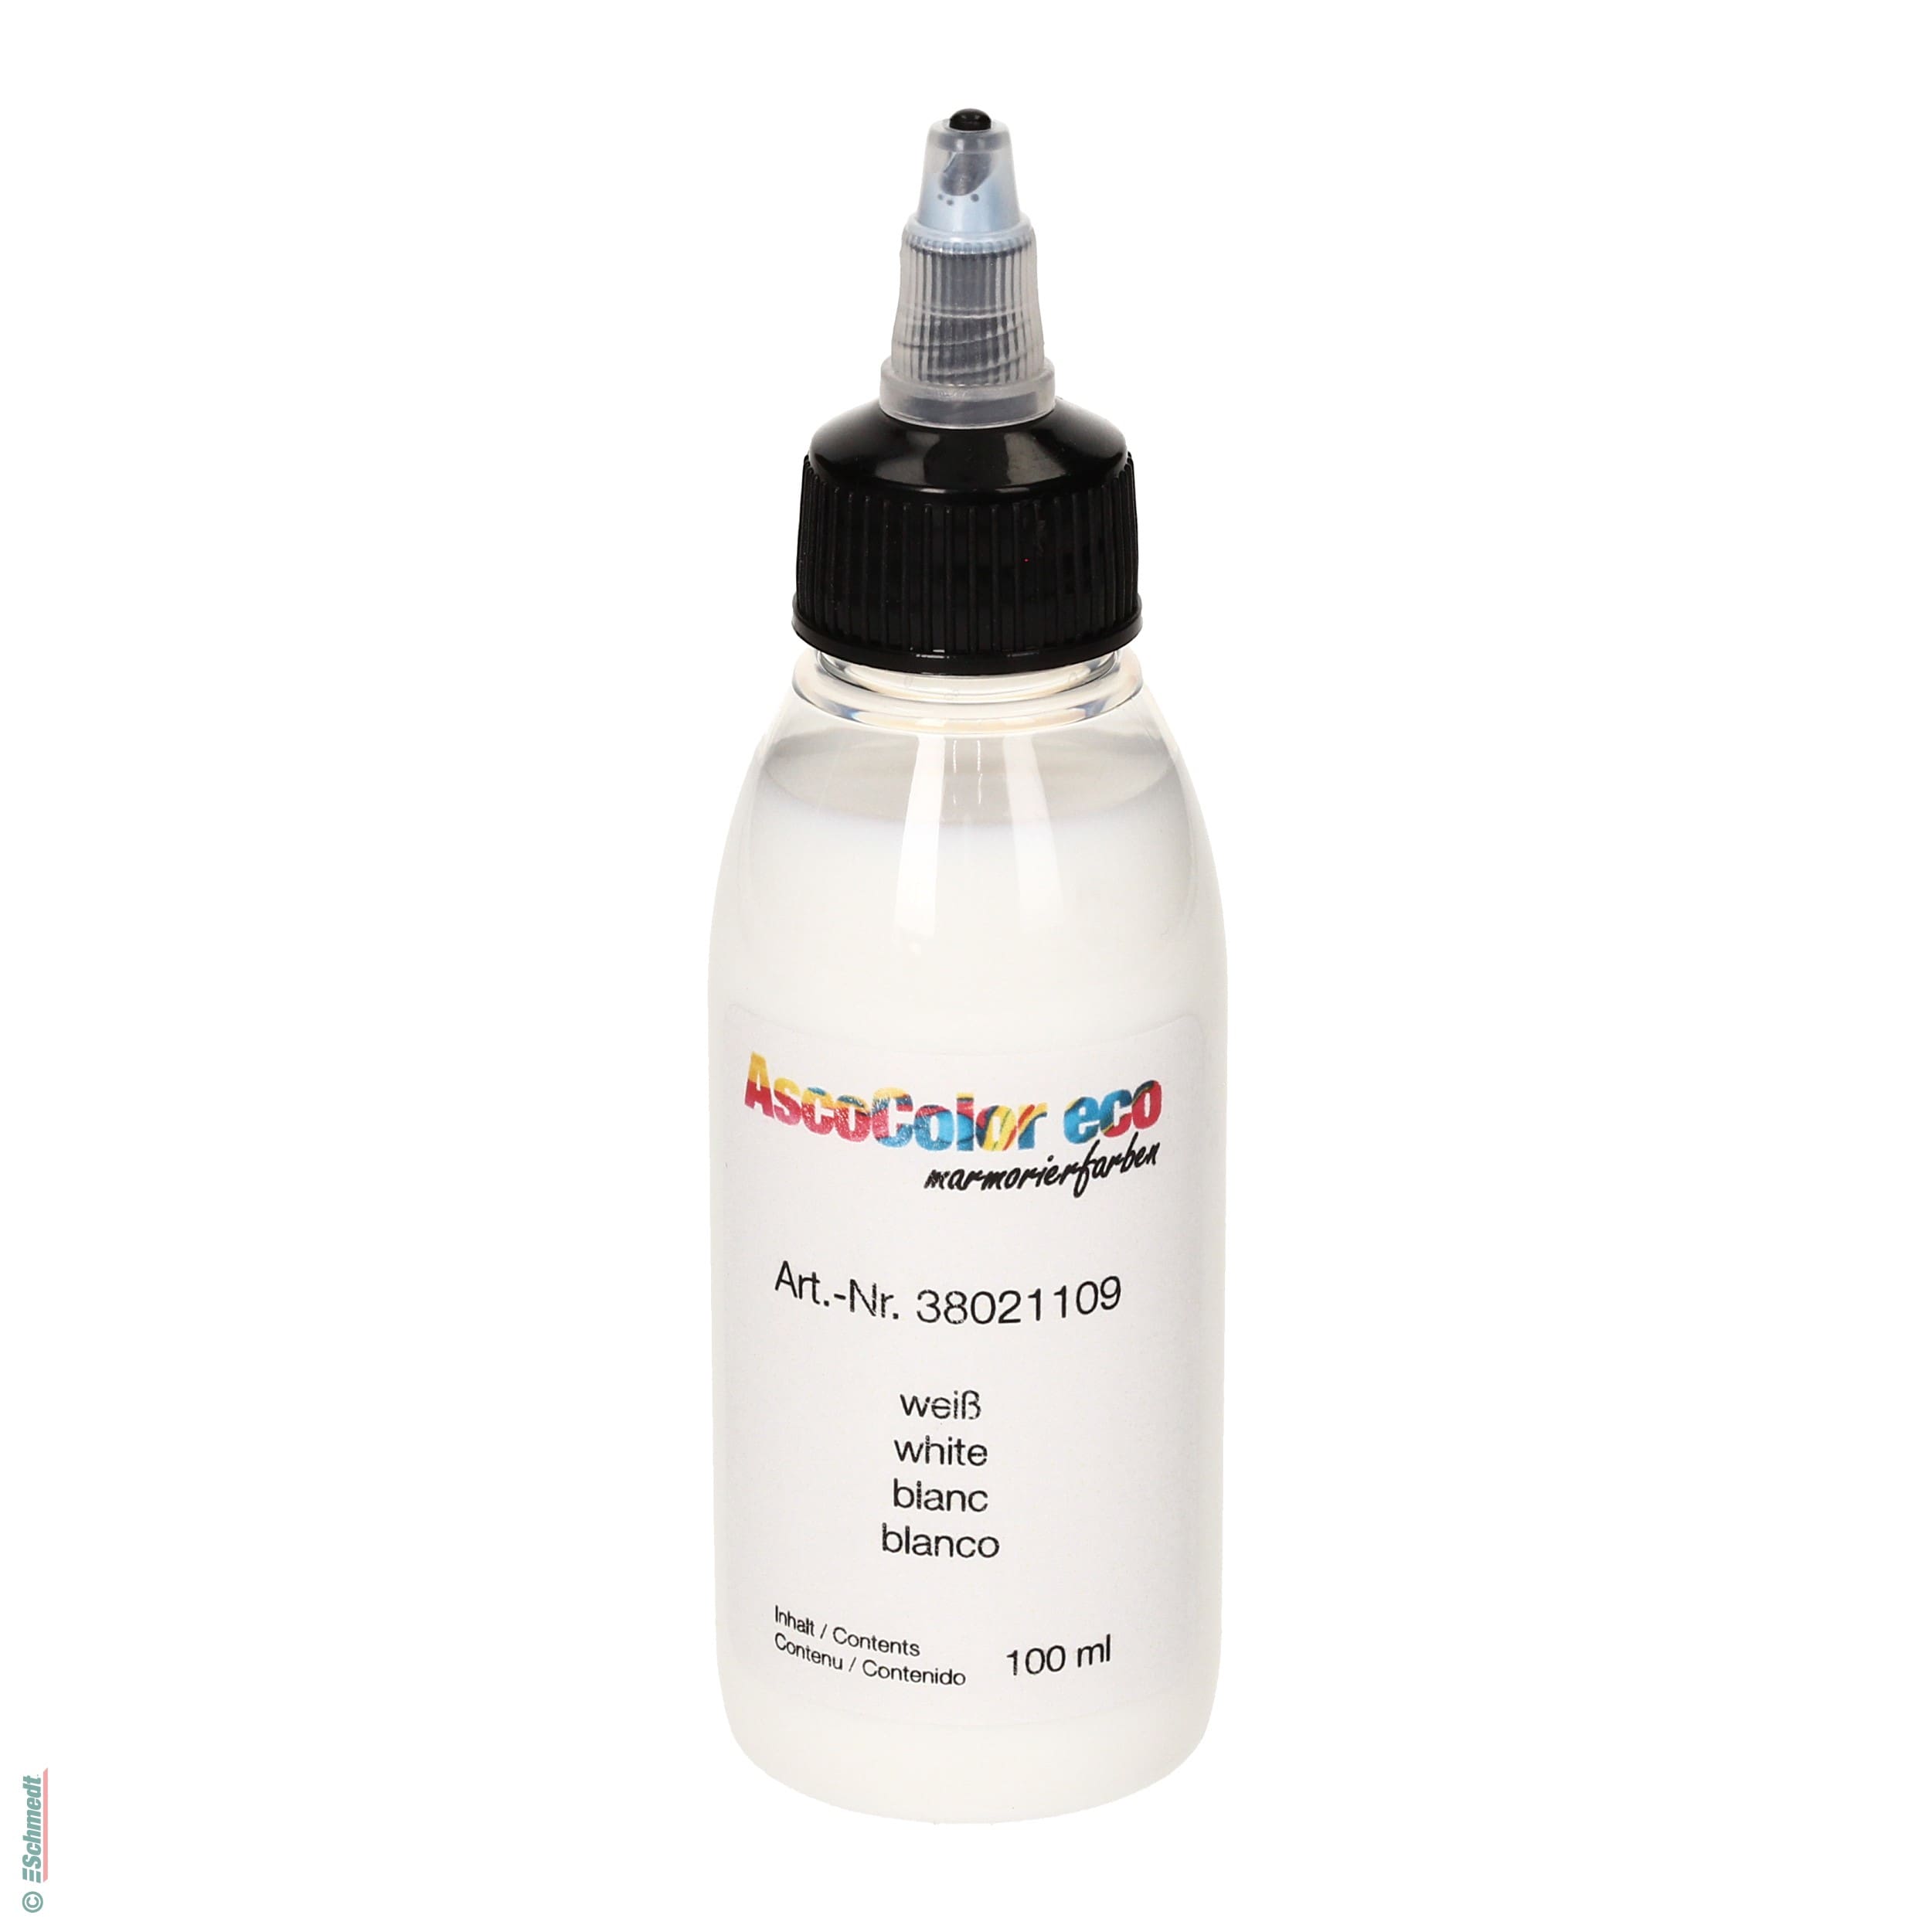 AscoColor eco - Marbling dye - Colour 109 - white - Contents Bottle / 100 ml - to produce marbled papers...